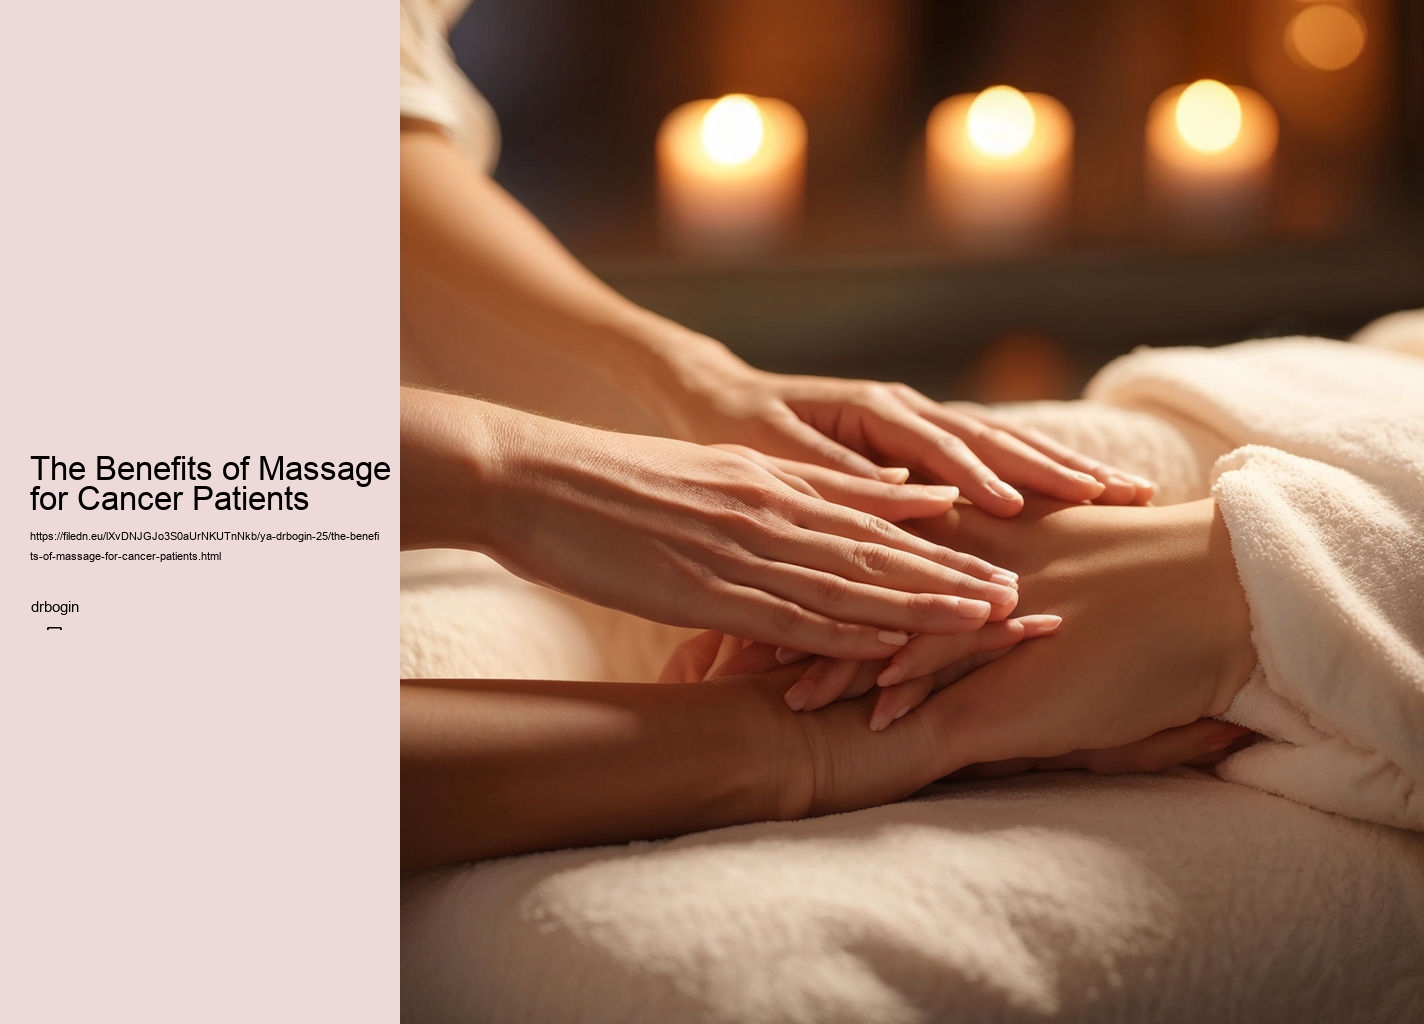 The Benefits of Massage for Cancer Patients